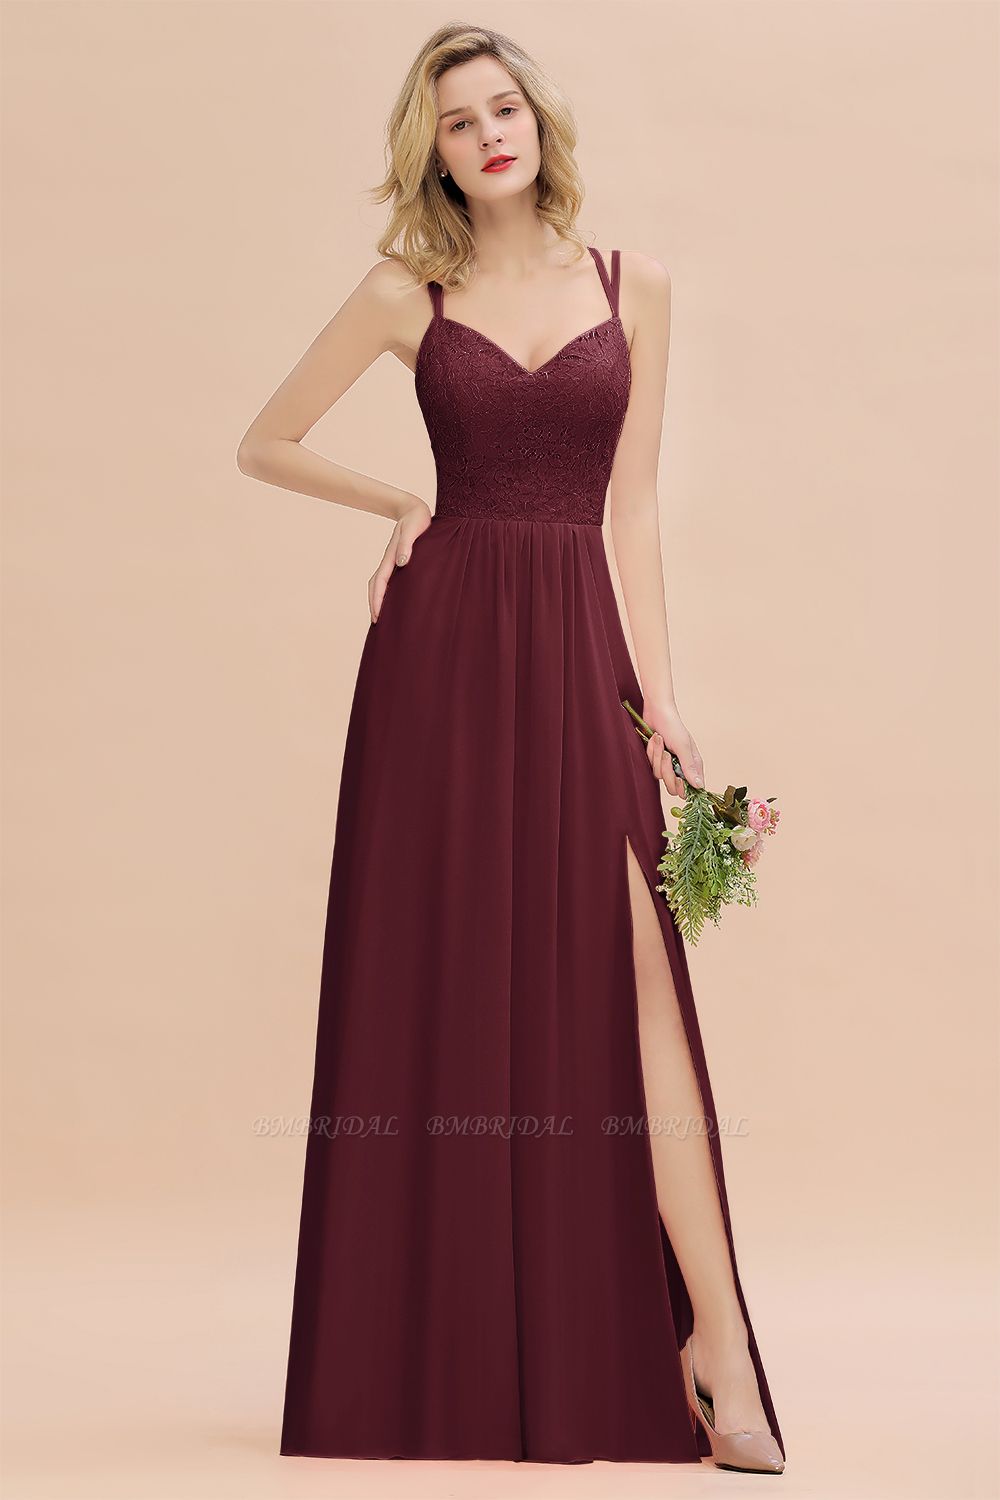 BMbridal Sexy Spaghetti-Straps Coral Lace Bridesmaid Dresses with Slit